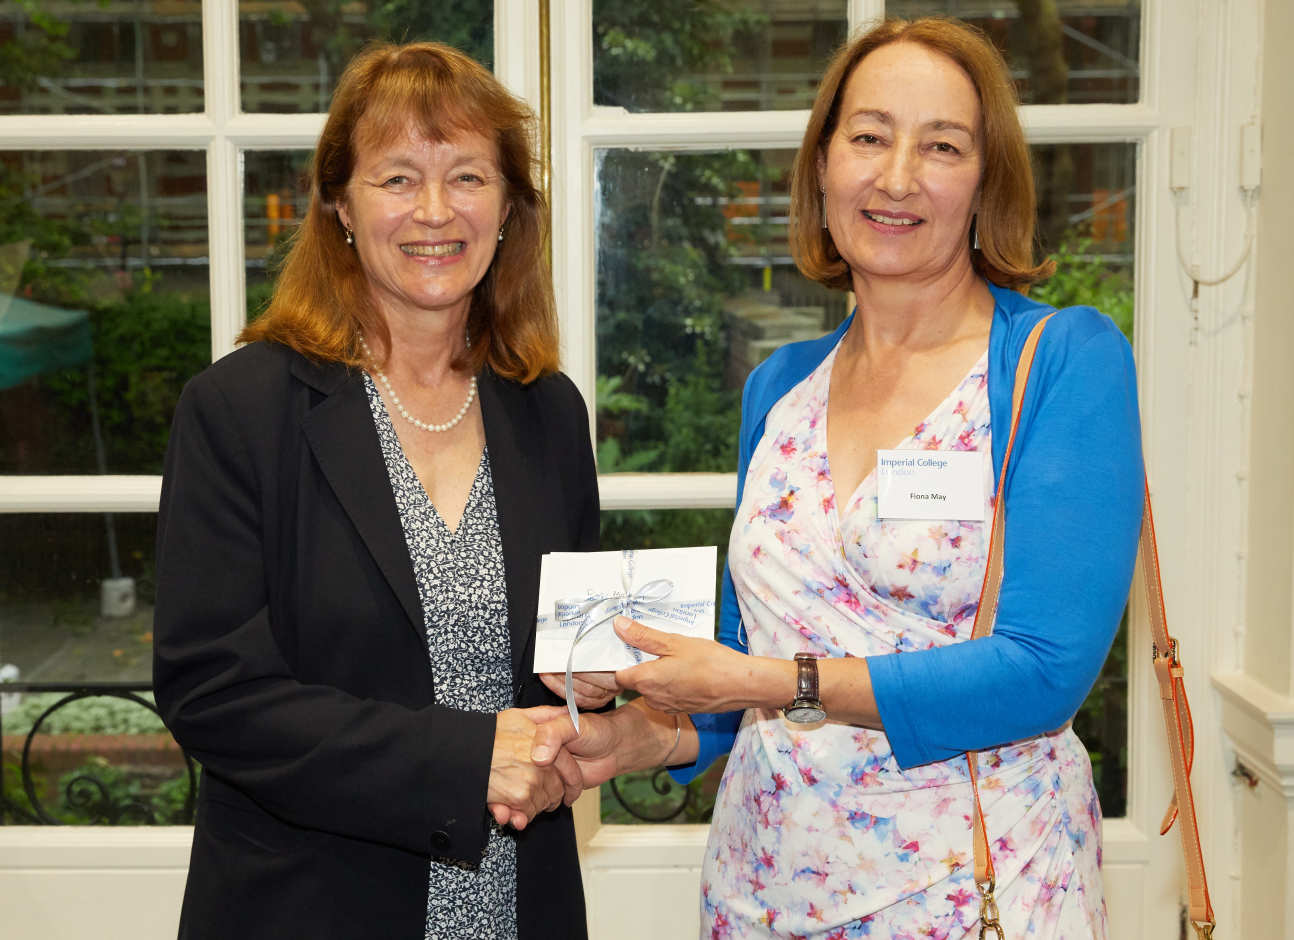 Fiona May receives her prize from President Alice Gast